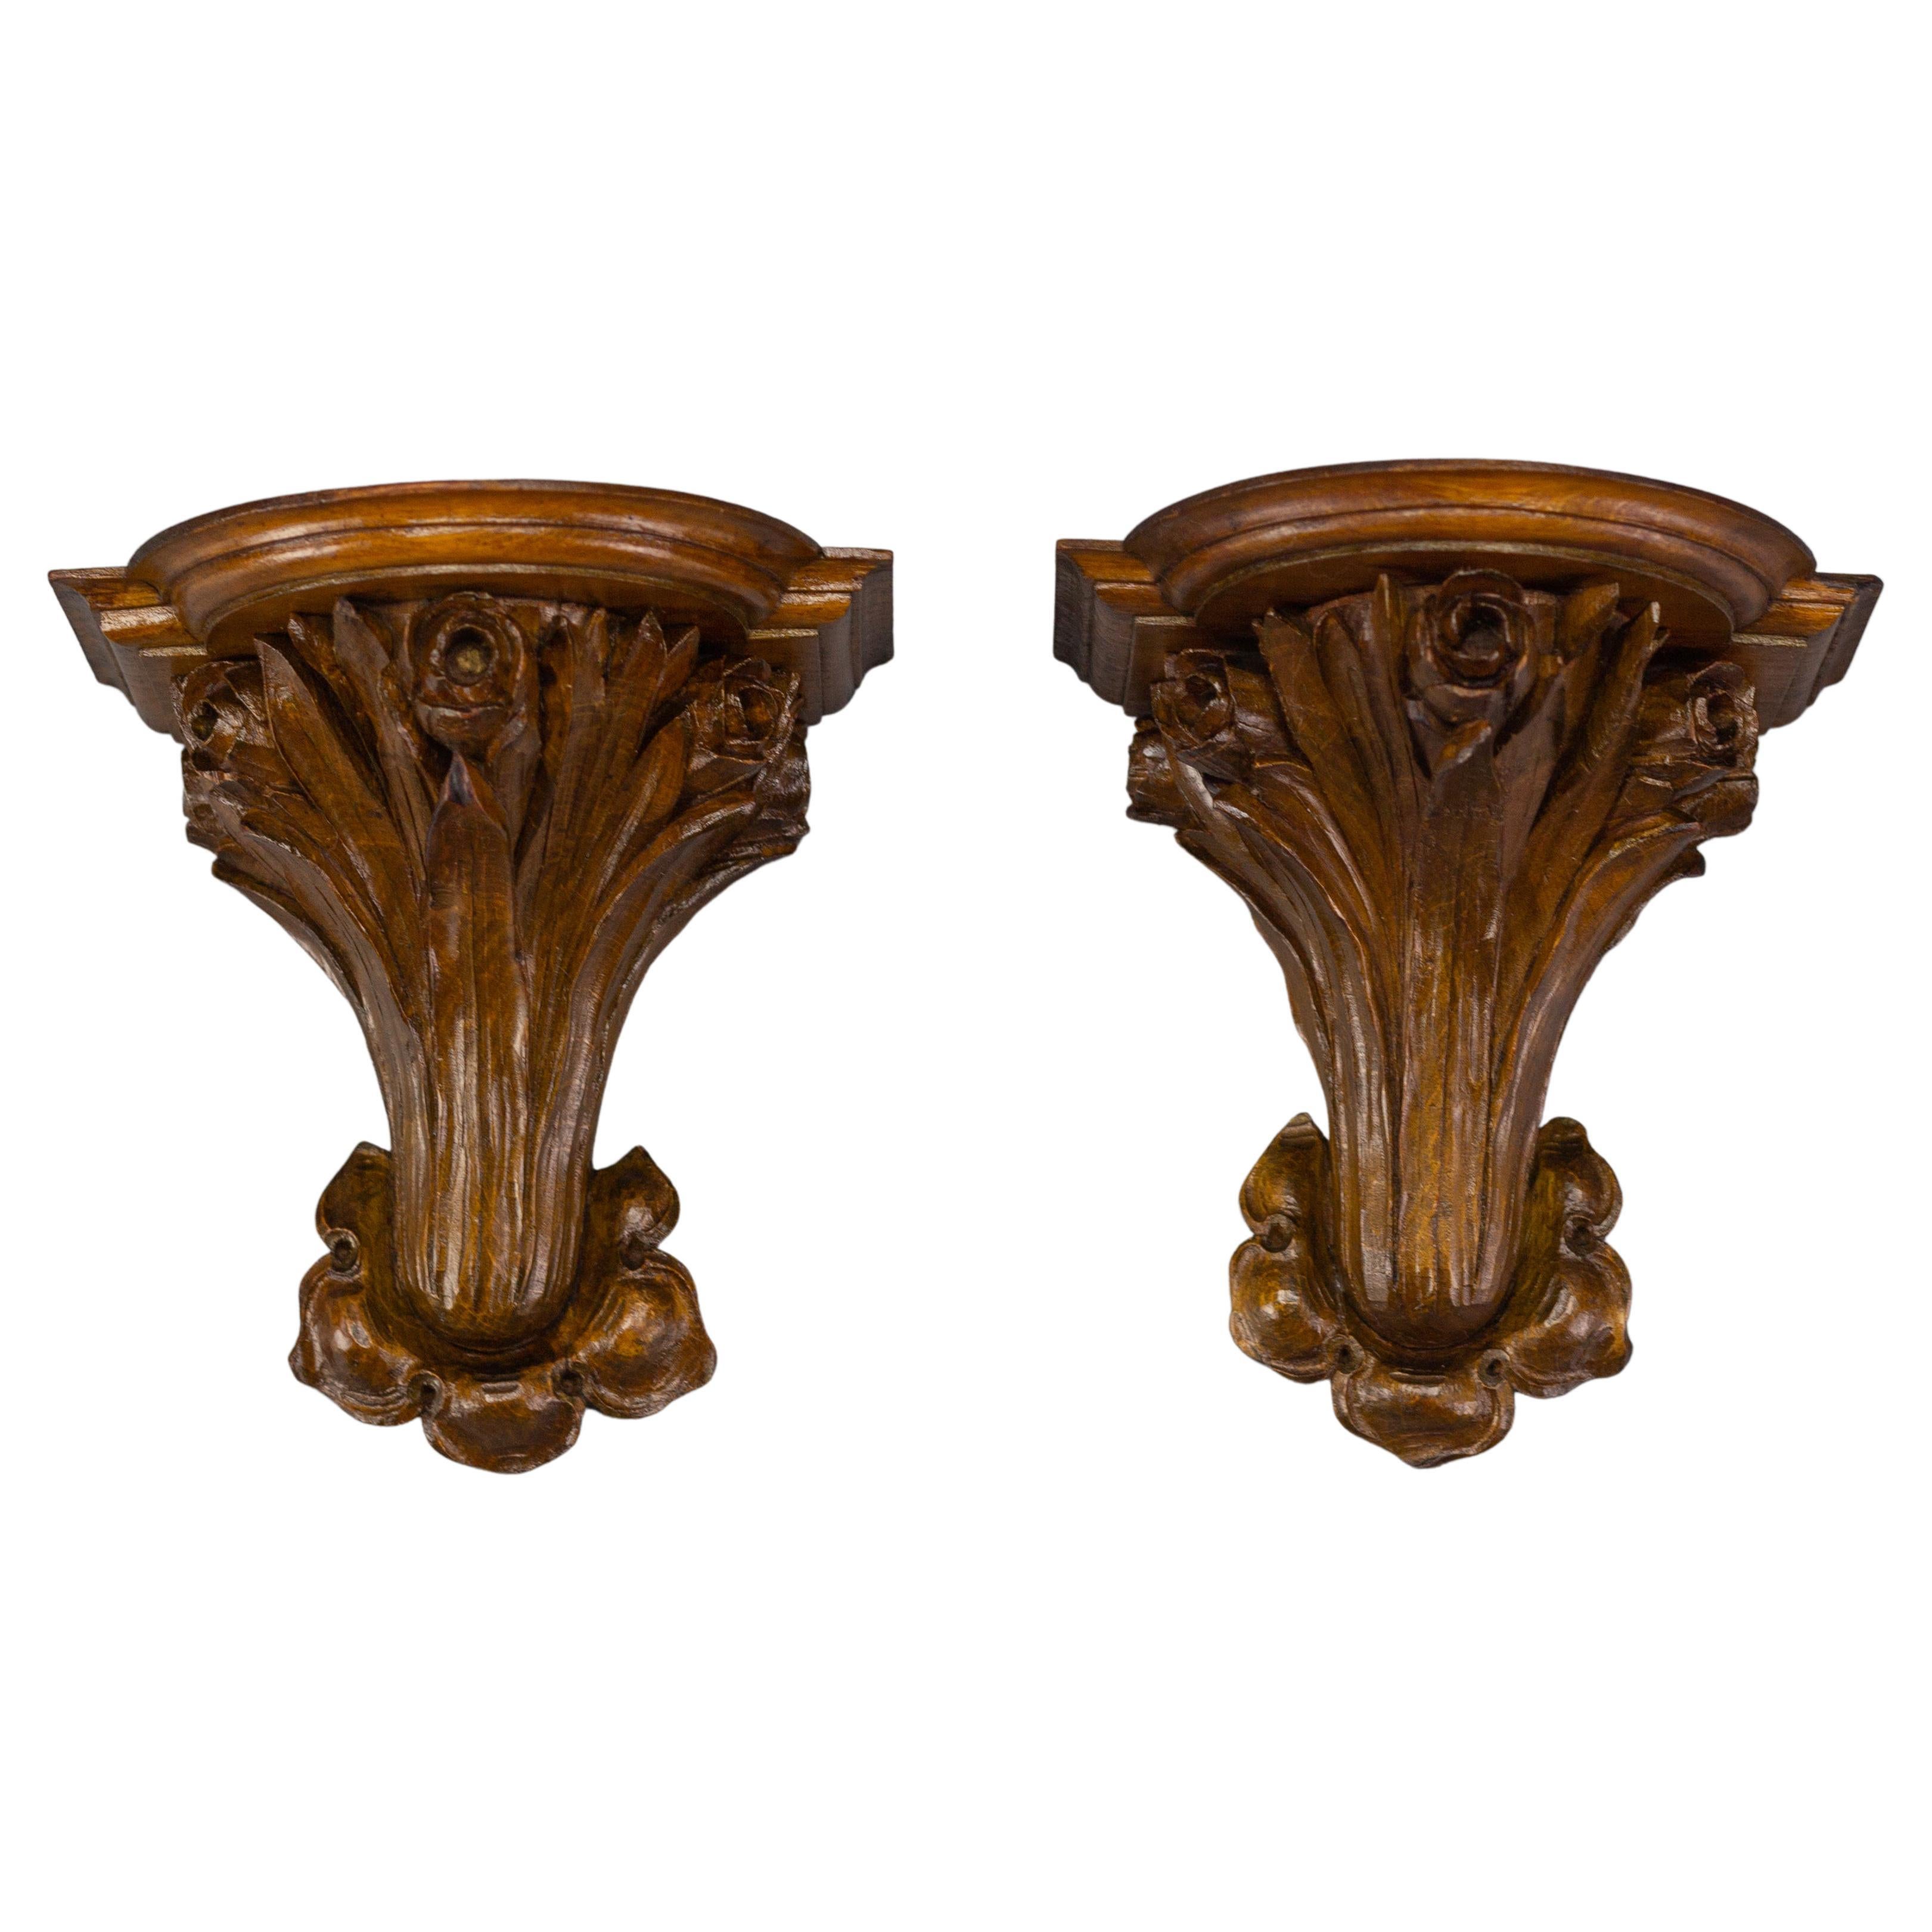 Pair of French Art Nouveau Carved Wooden Wall Brackets, 1920s